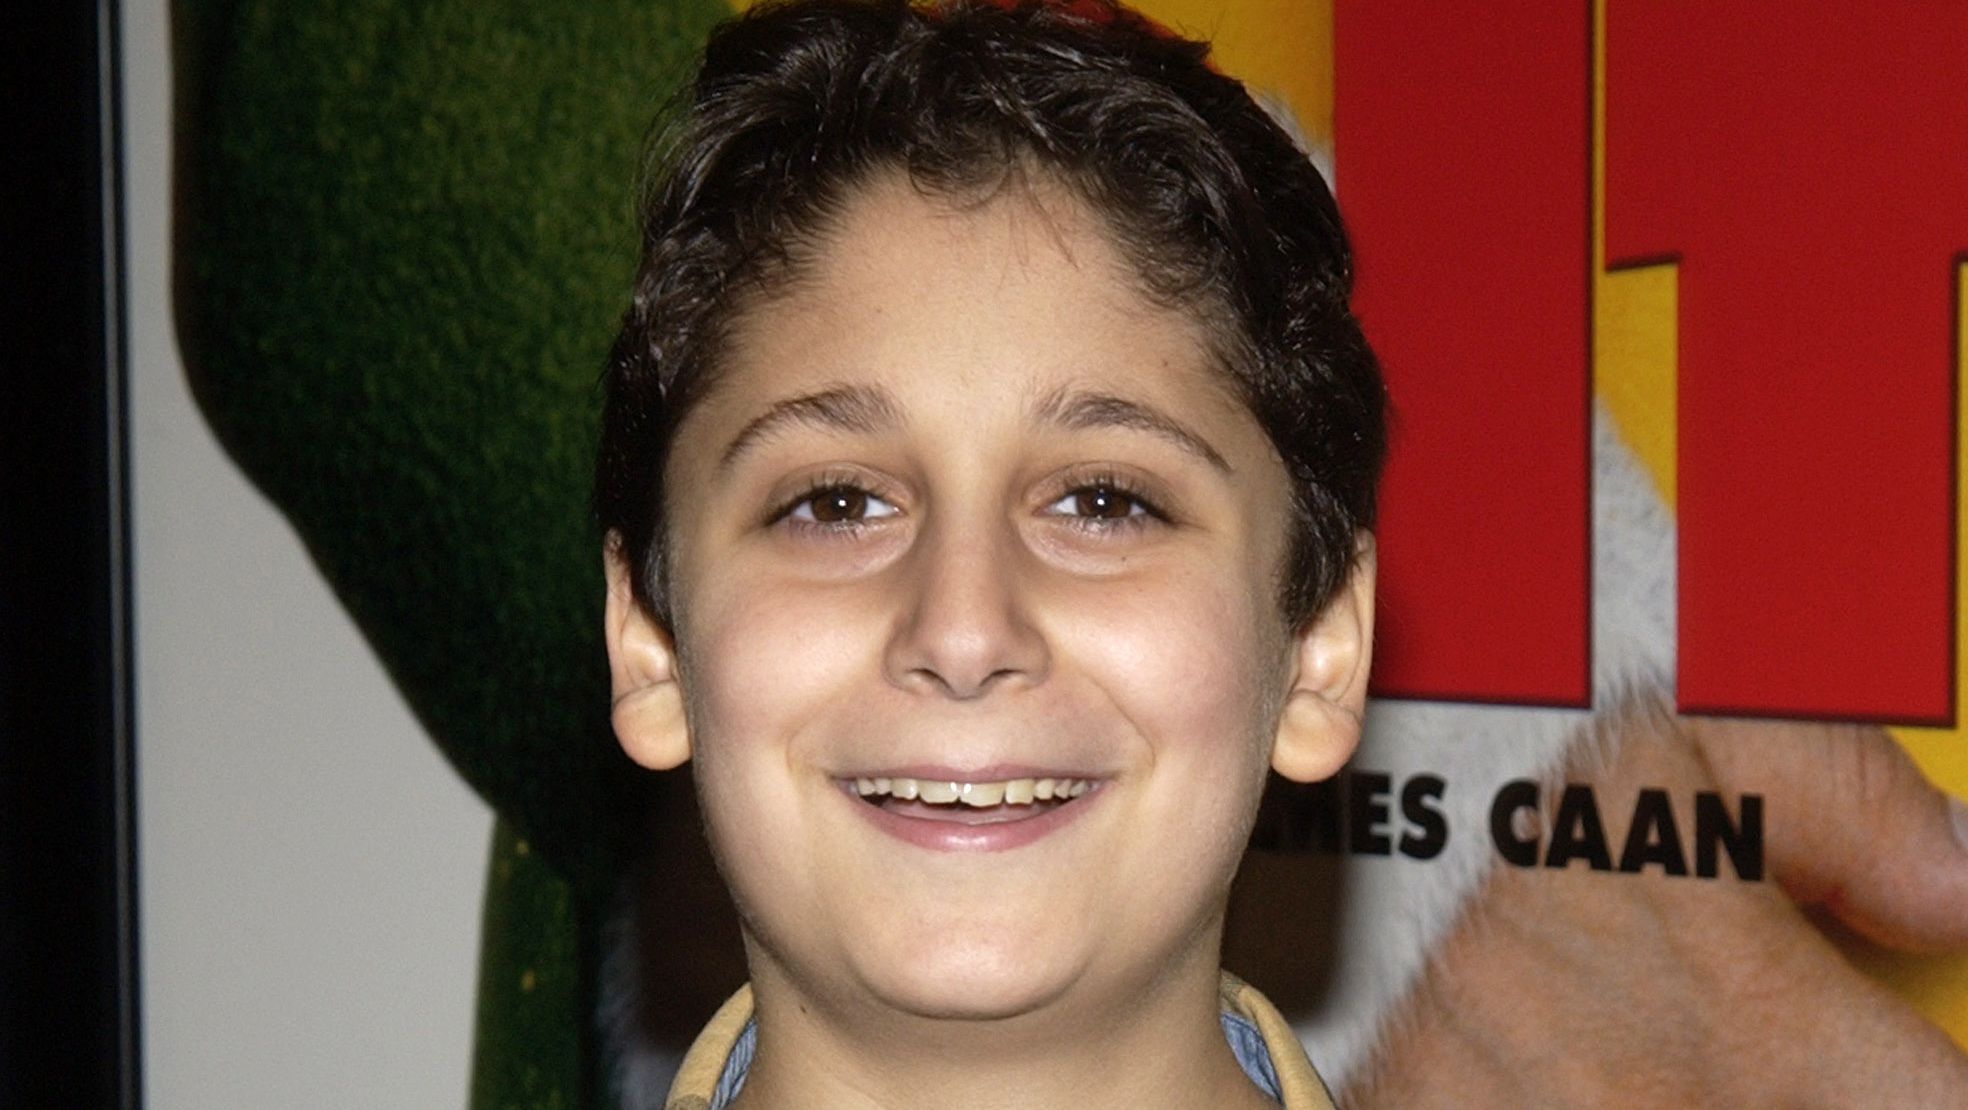 This is what the kid, Michael who starred alongside Will Ferrell, from Elf looks like today.